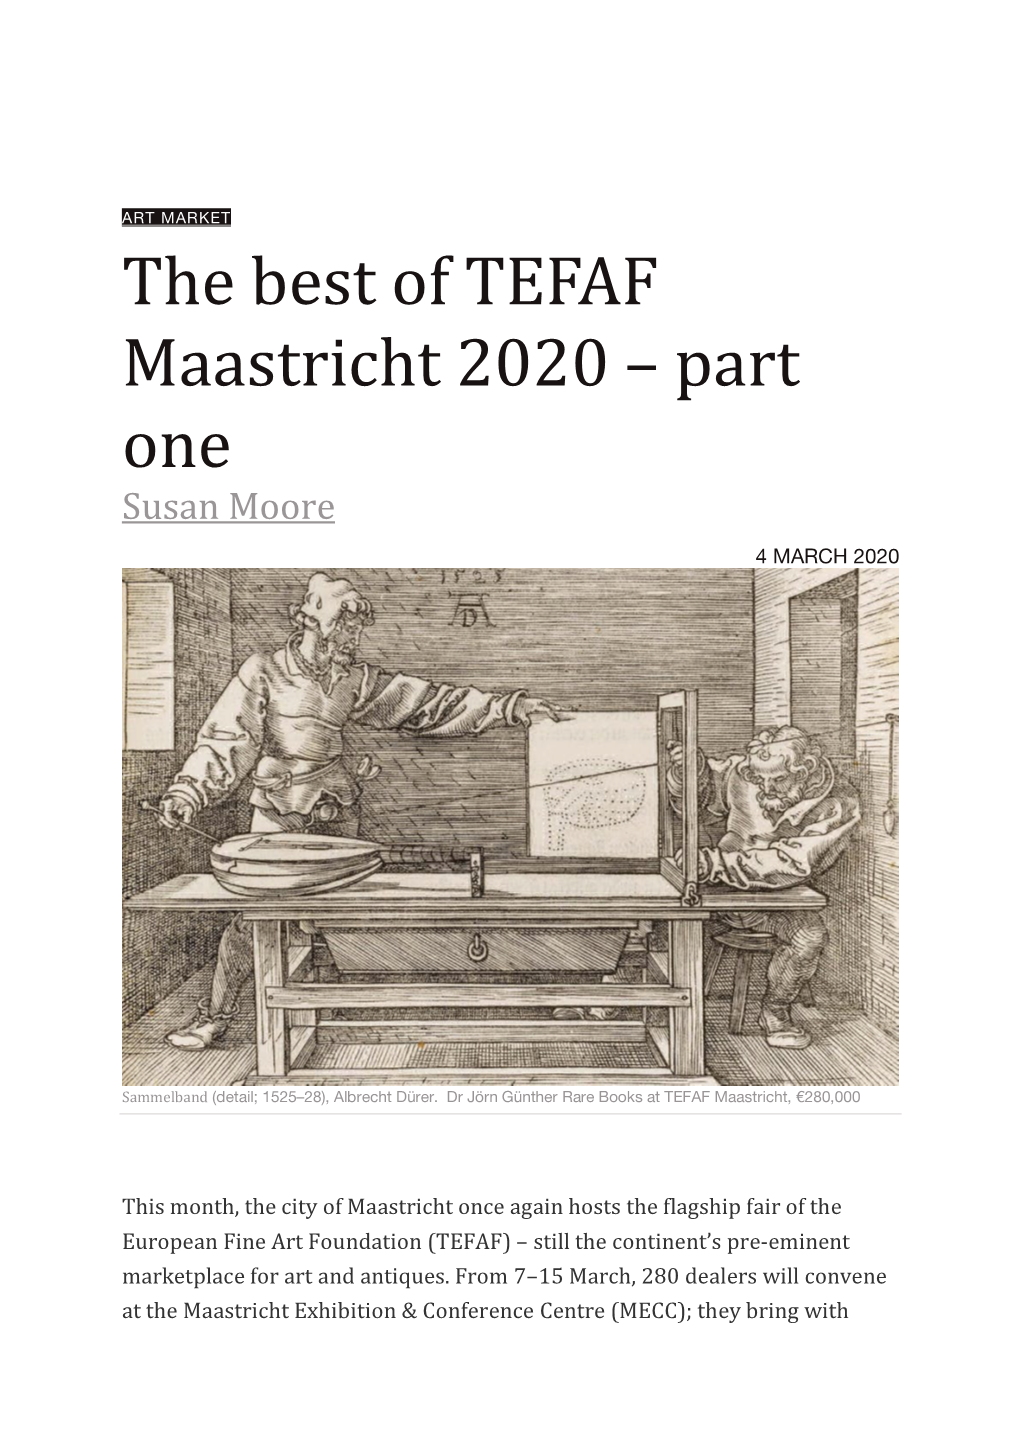 The Best of TEFAF Maastricht 2020 – Part One Susan Moore